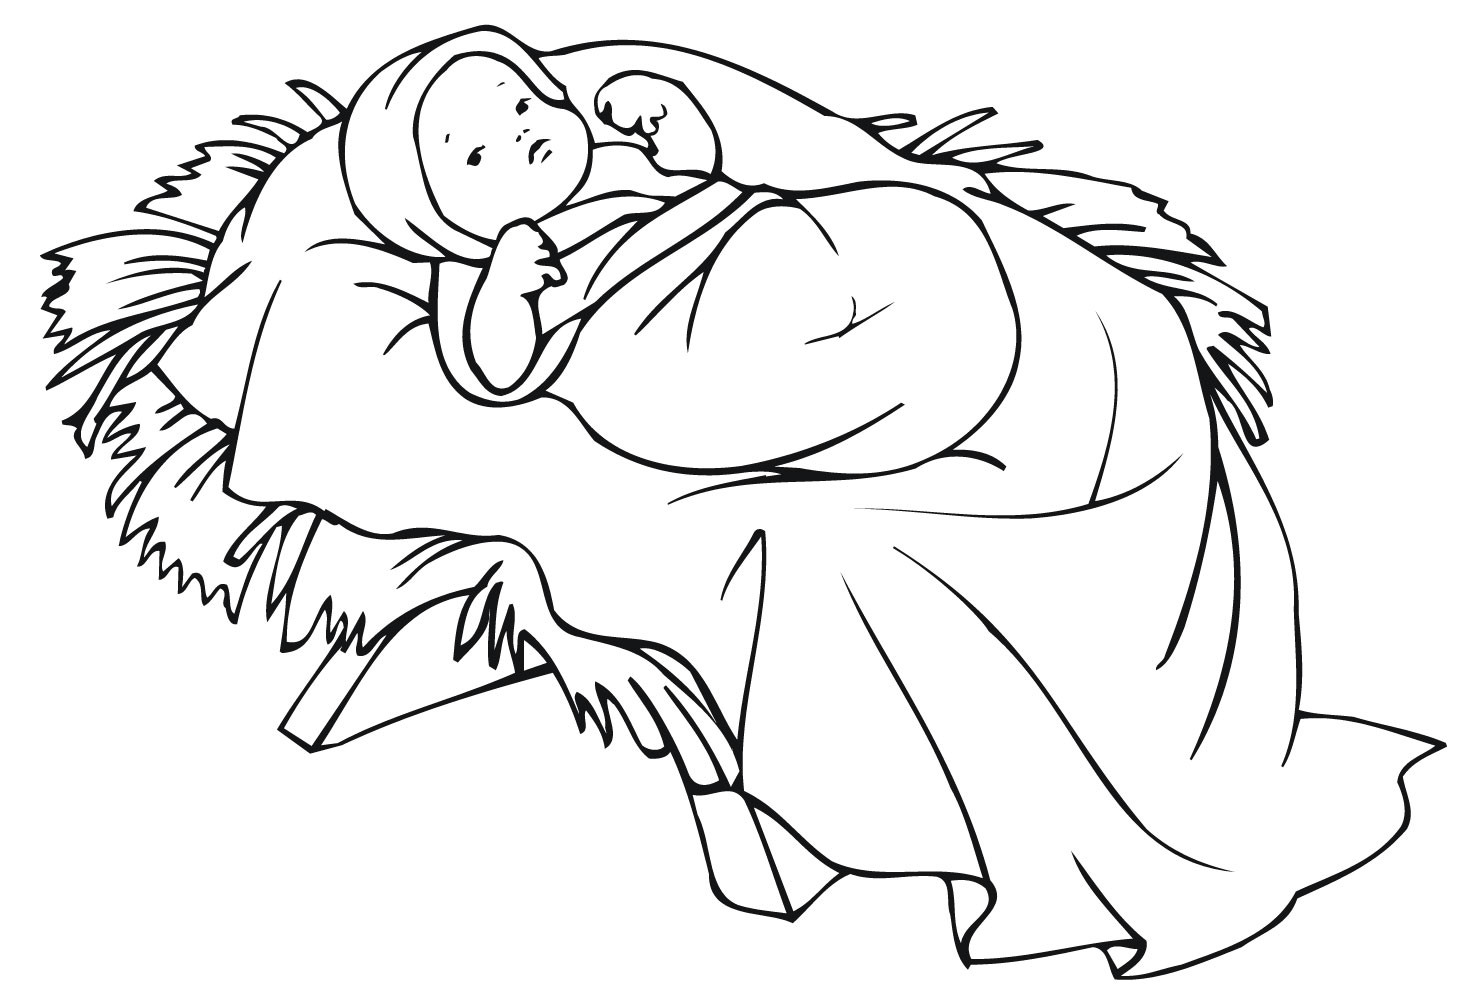 Baby Jesus Coloring Pages For Preschoolers
 XMAS COLORING PAGES